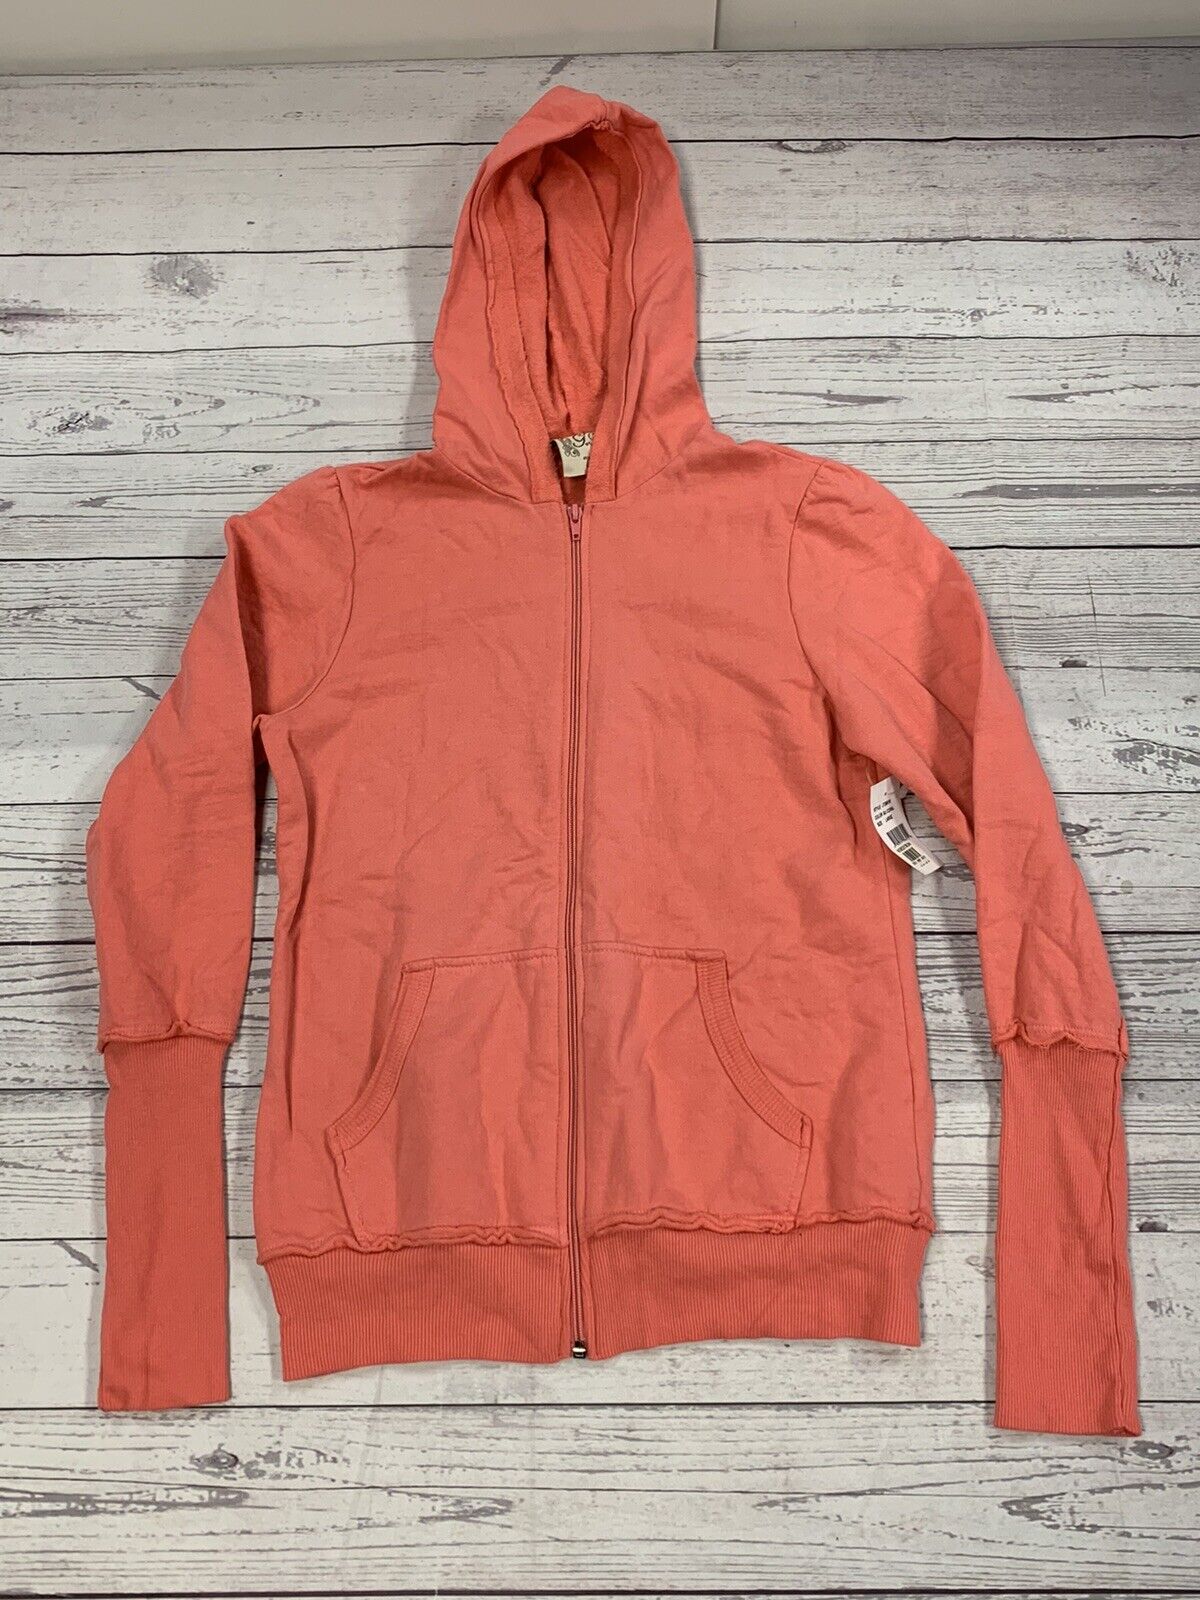 G Girl Womens coral Full Zip Jacket Size Large